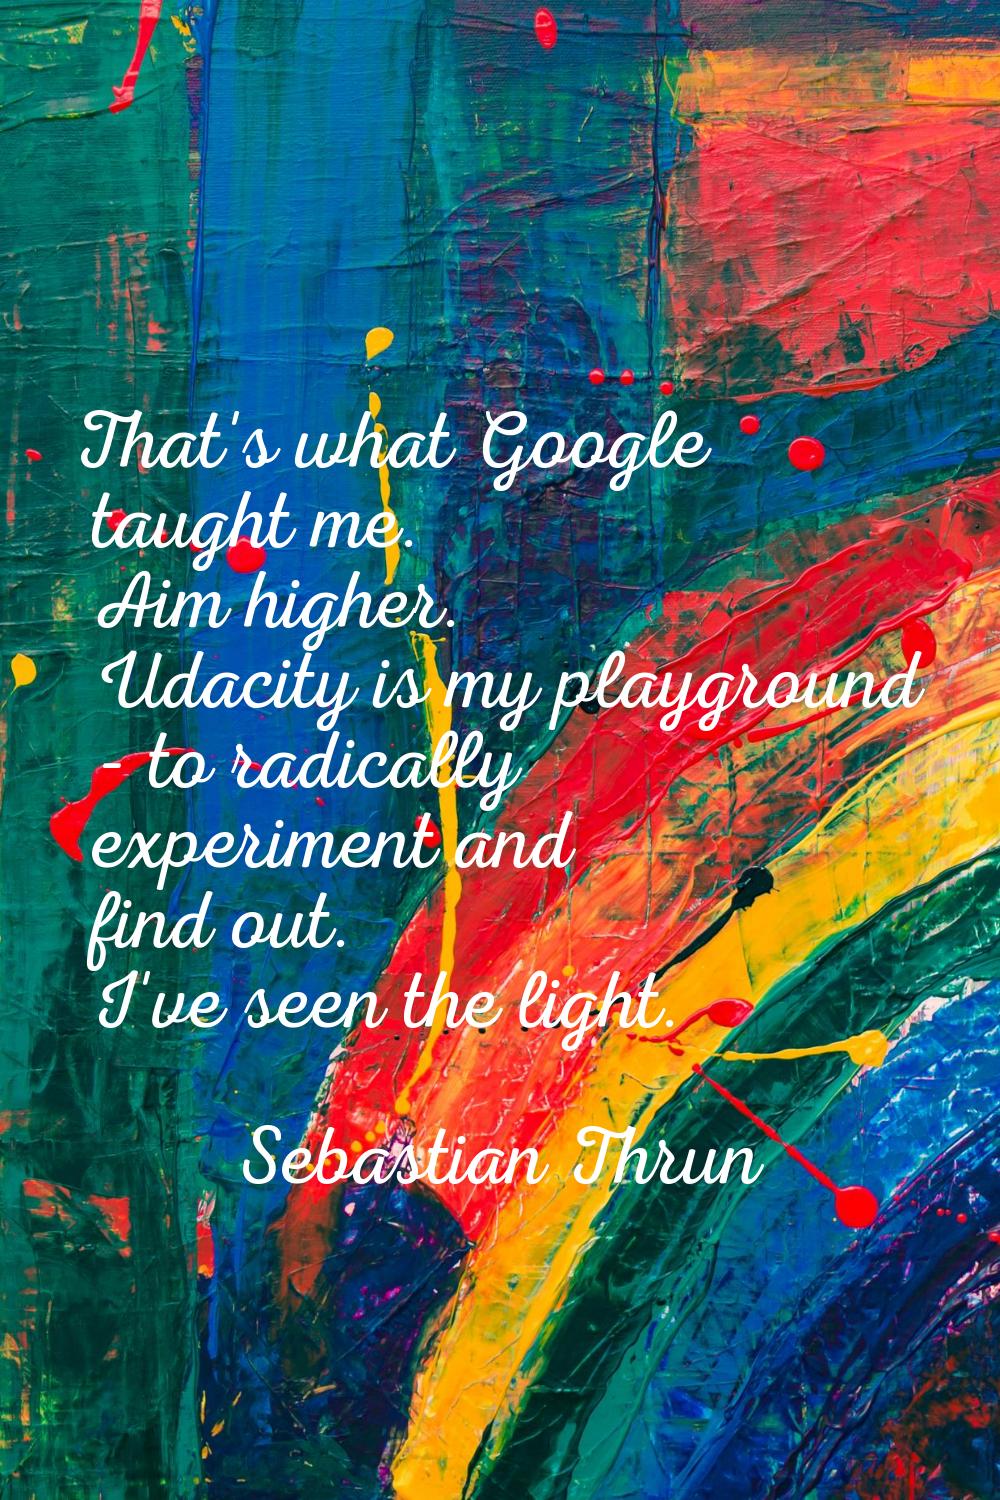 That's what Google taught me. Aim higher. Udacity is my playground - to radically experiment and fi